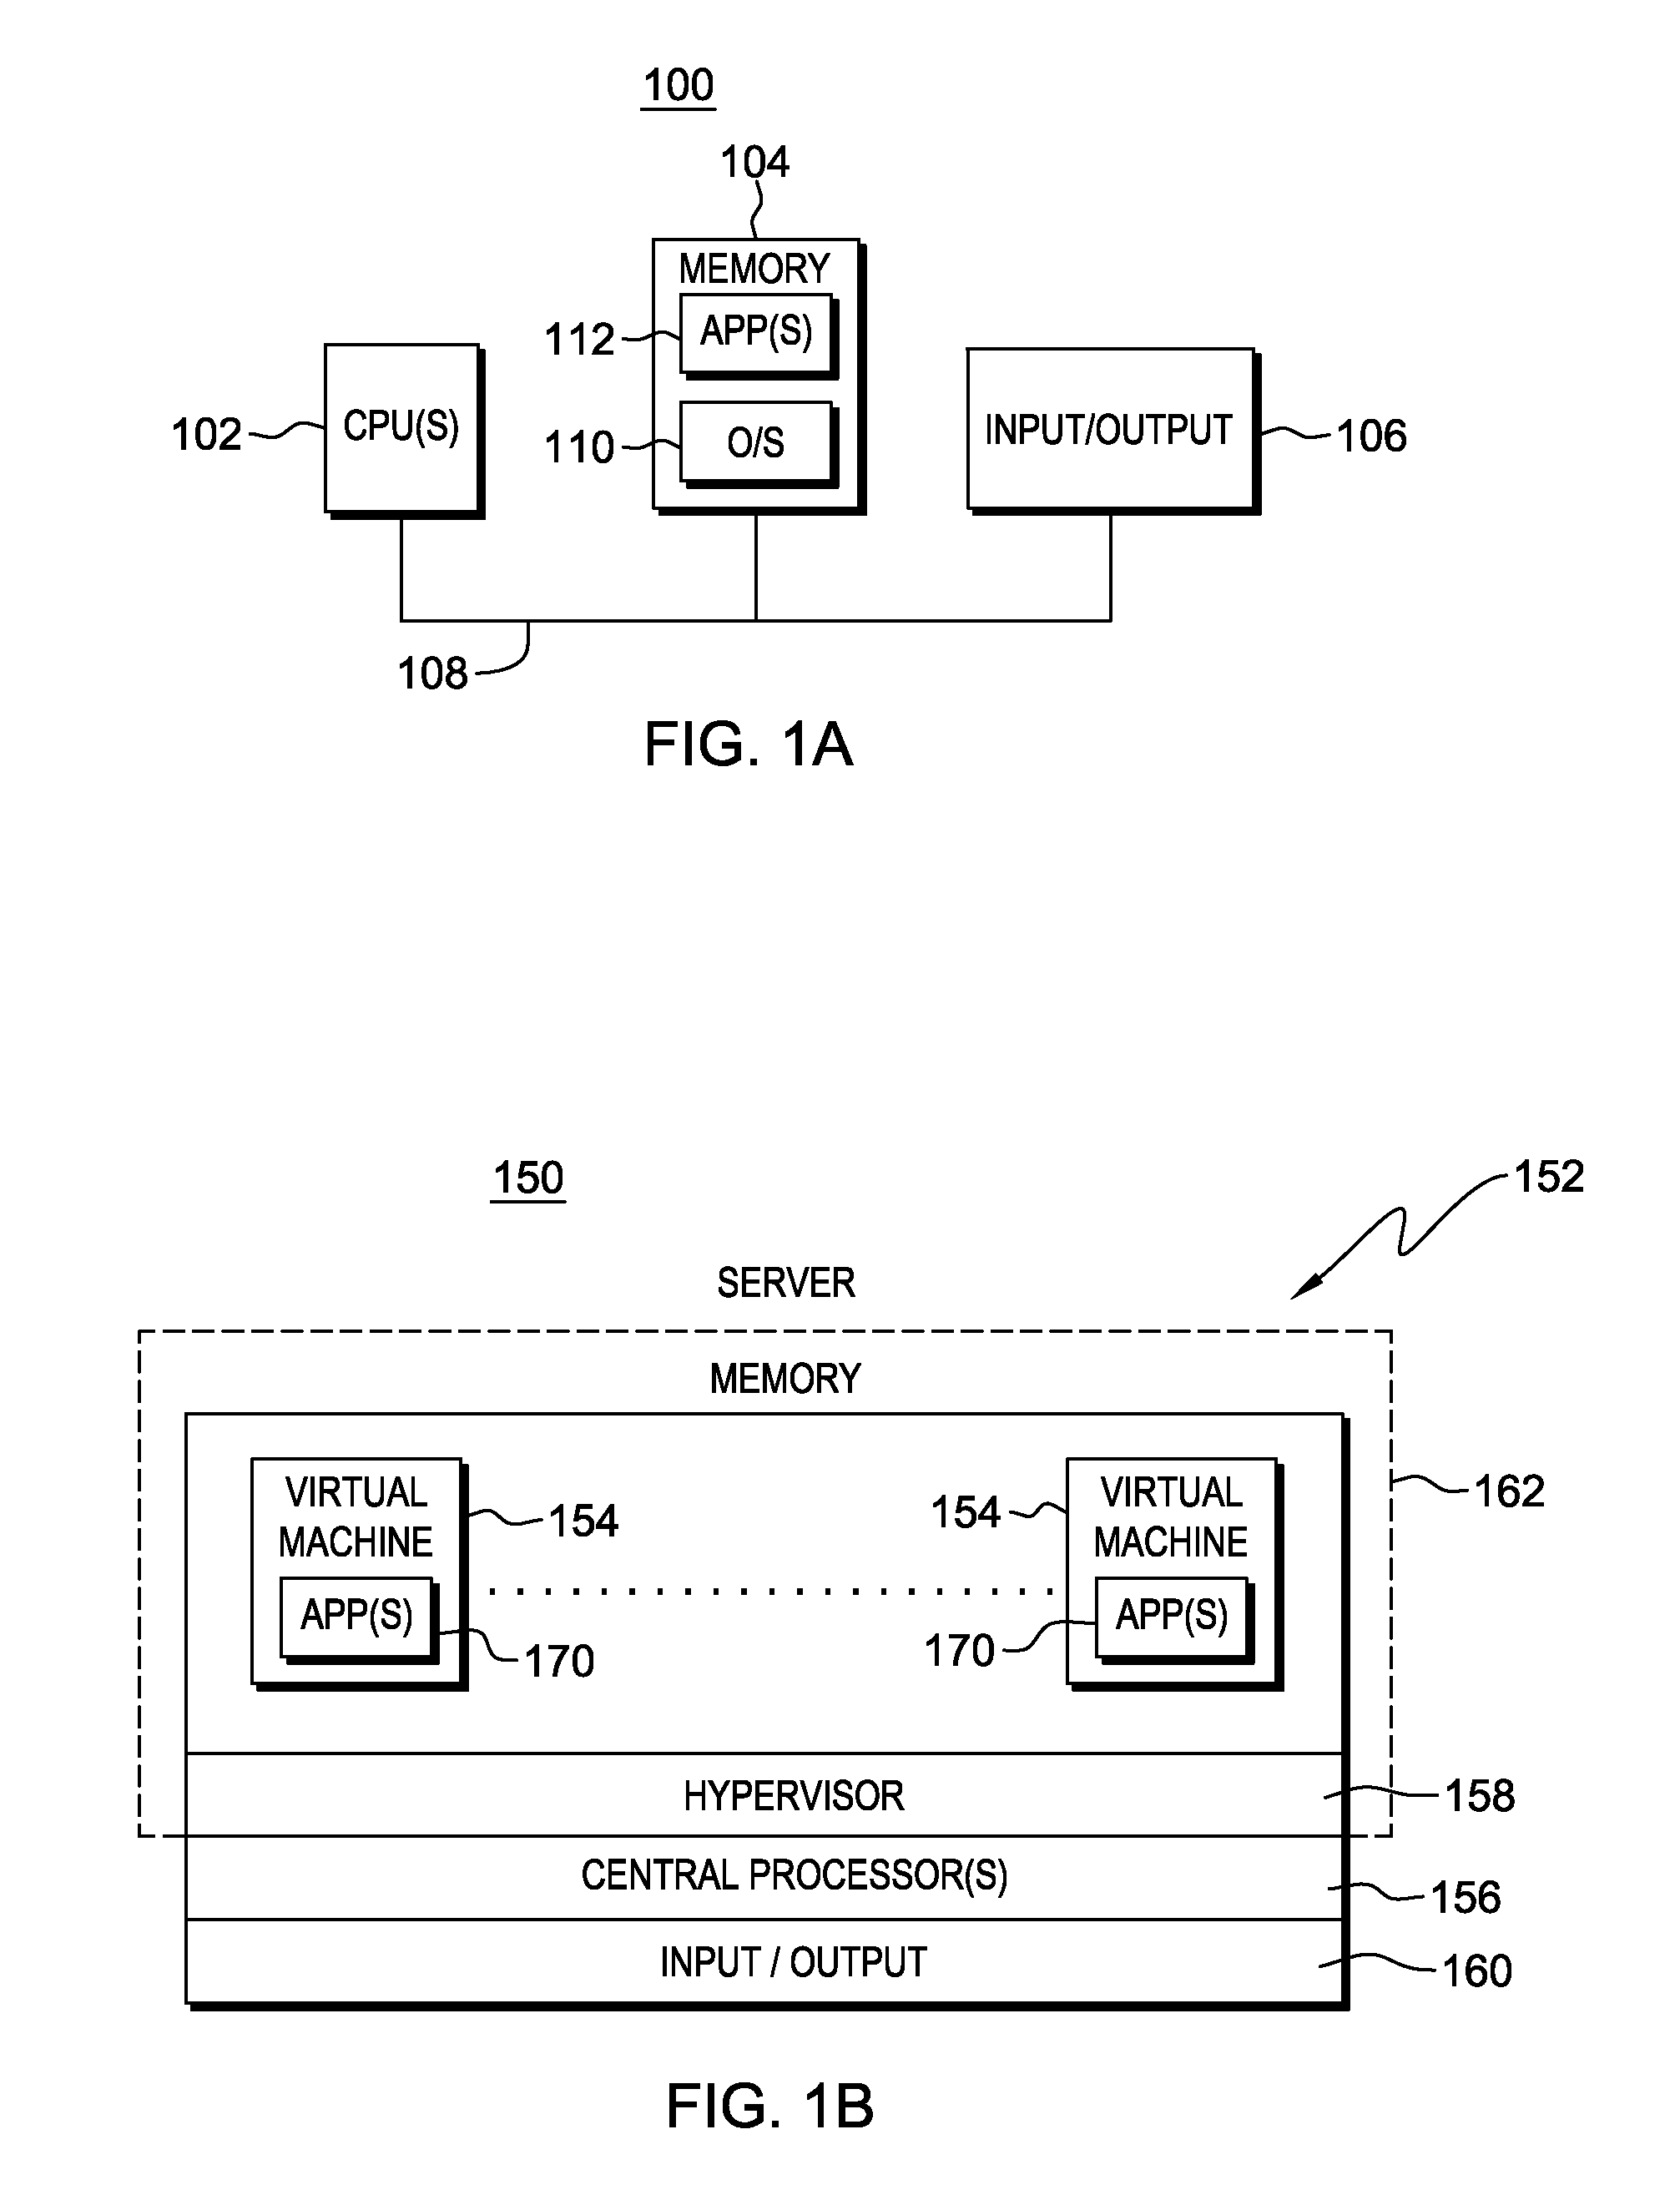 Physical memory fault mitigation in a computing environment